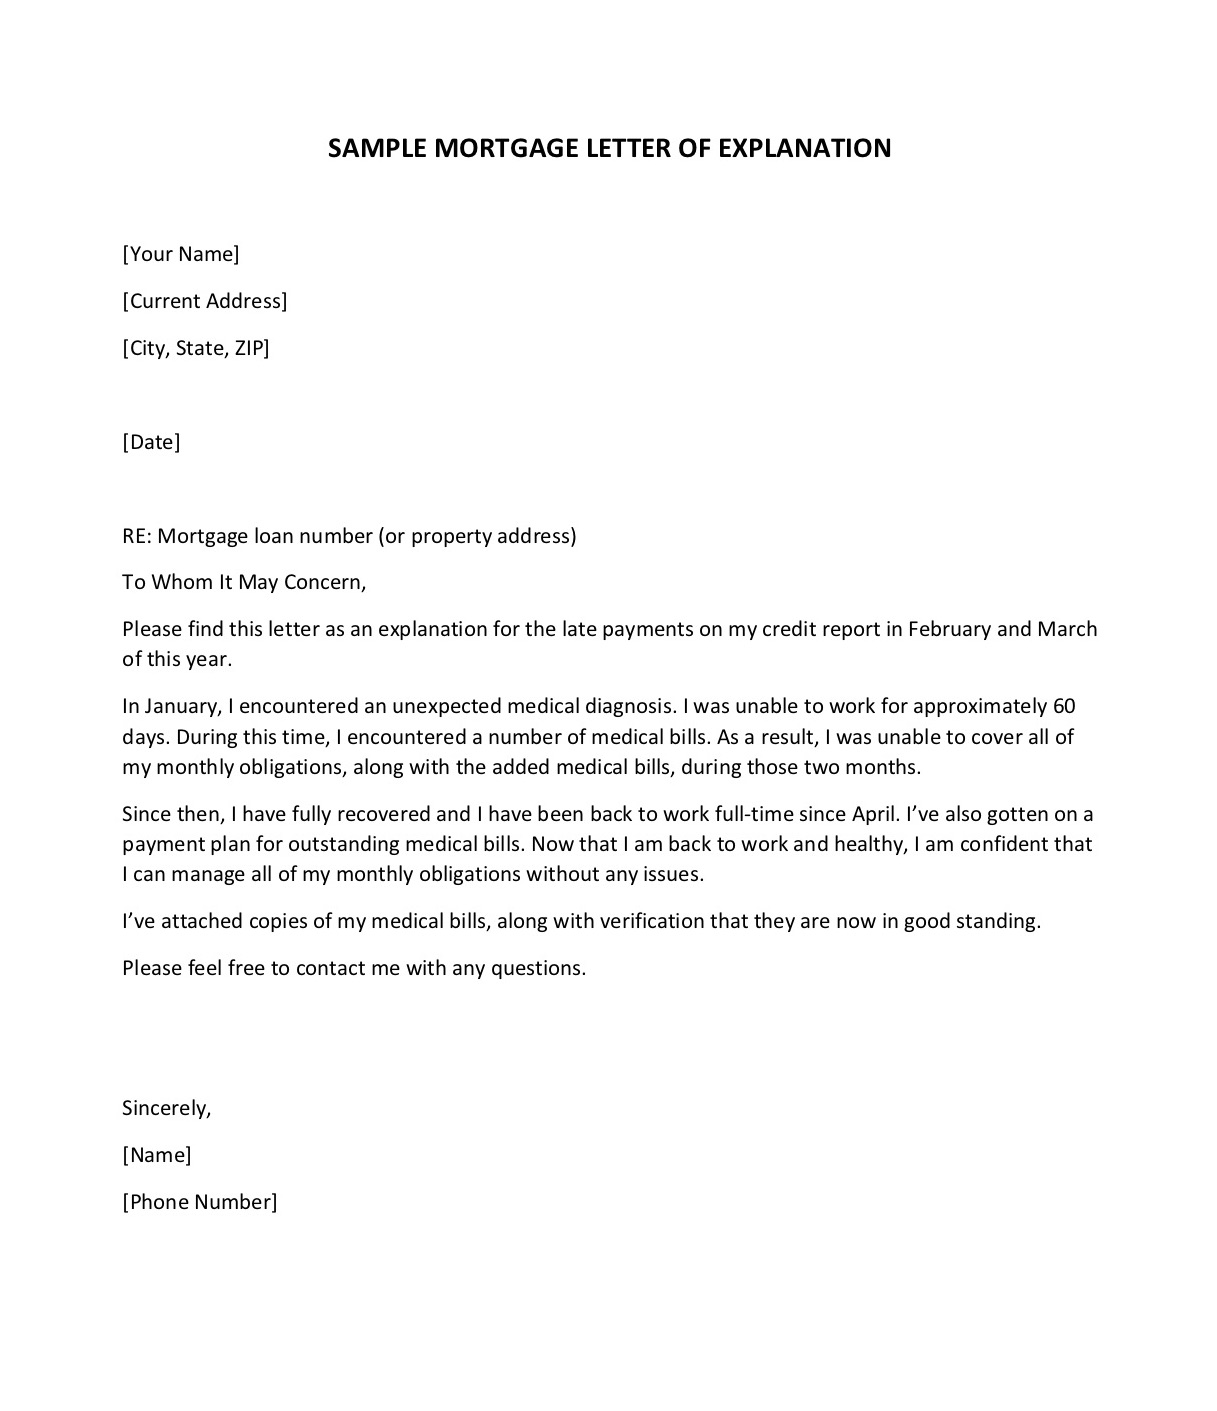 letter-of-explanation-for-mortgage-word-template-examples-letter-for